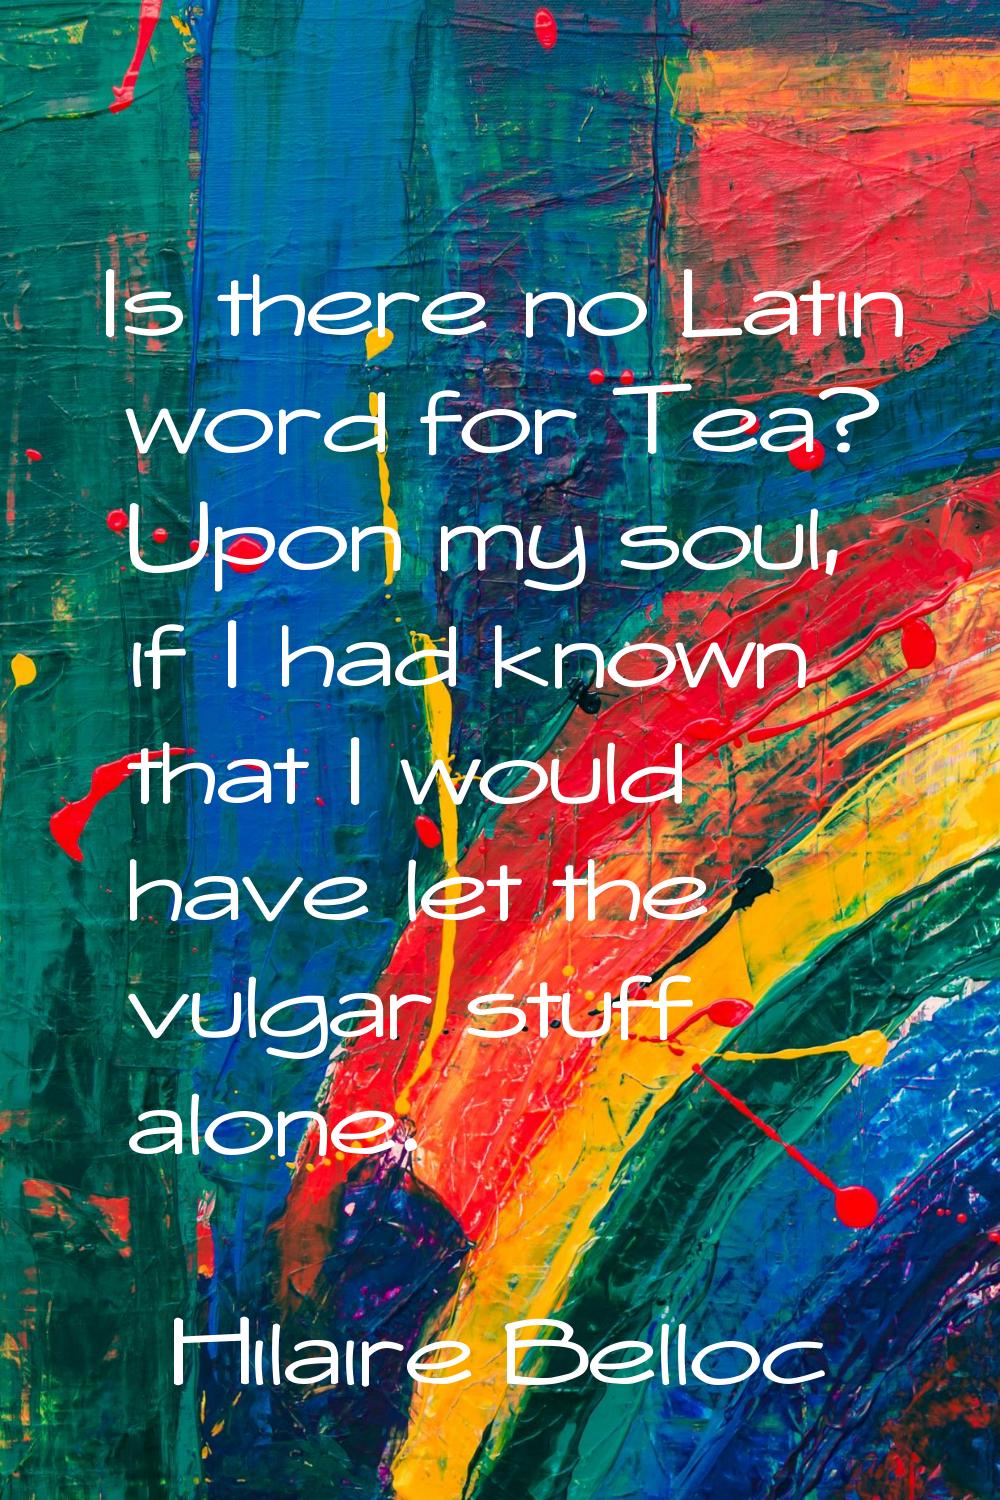 Is there no Latin word for Tea? Upon my soul, if I had known that I would have let the vulgar stuff